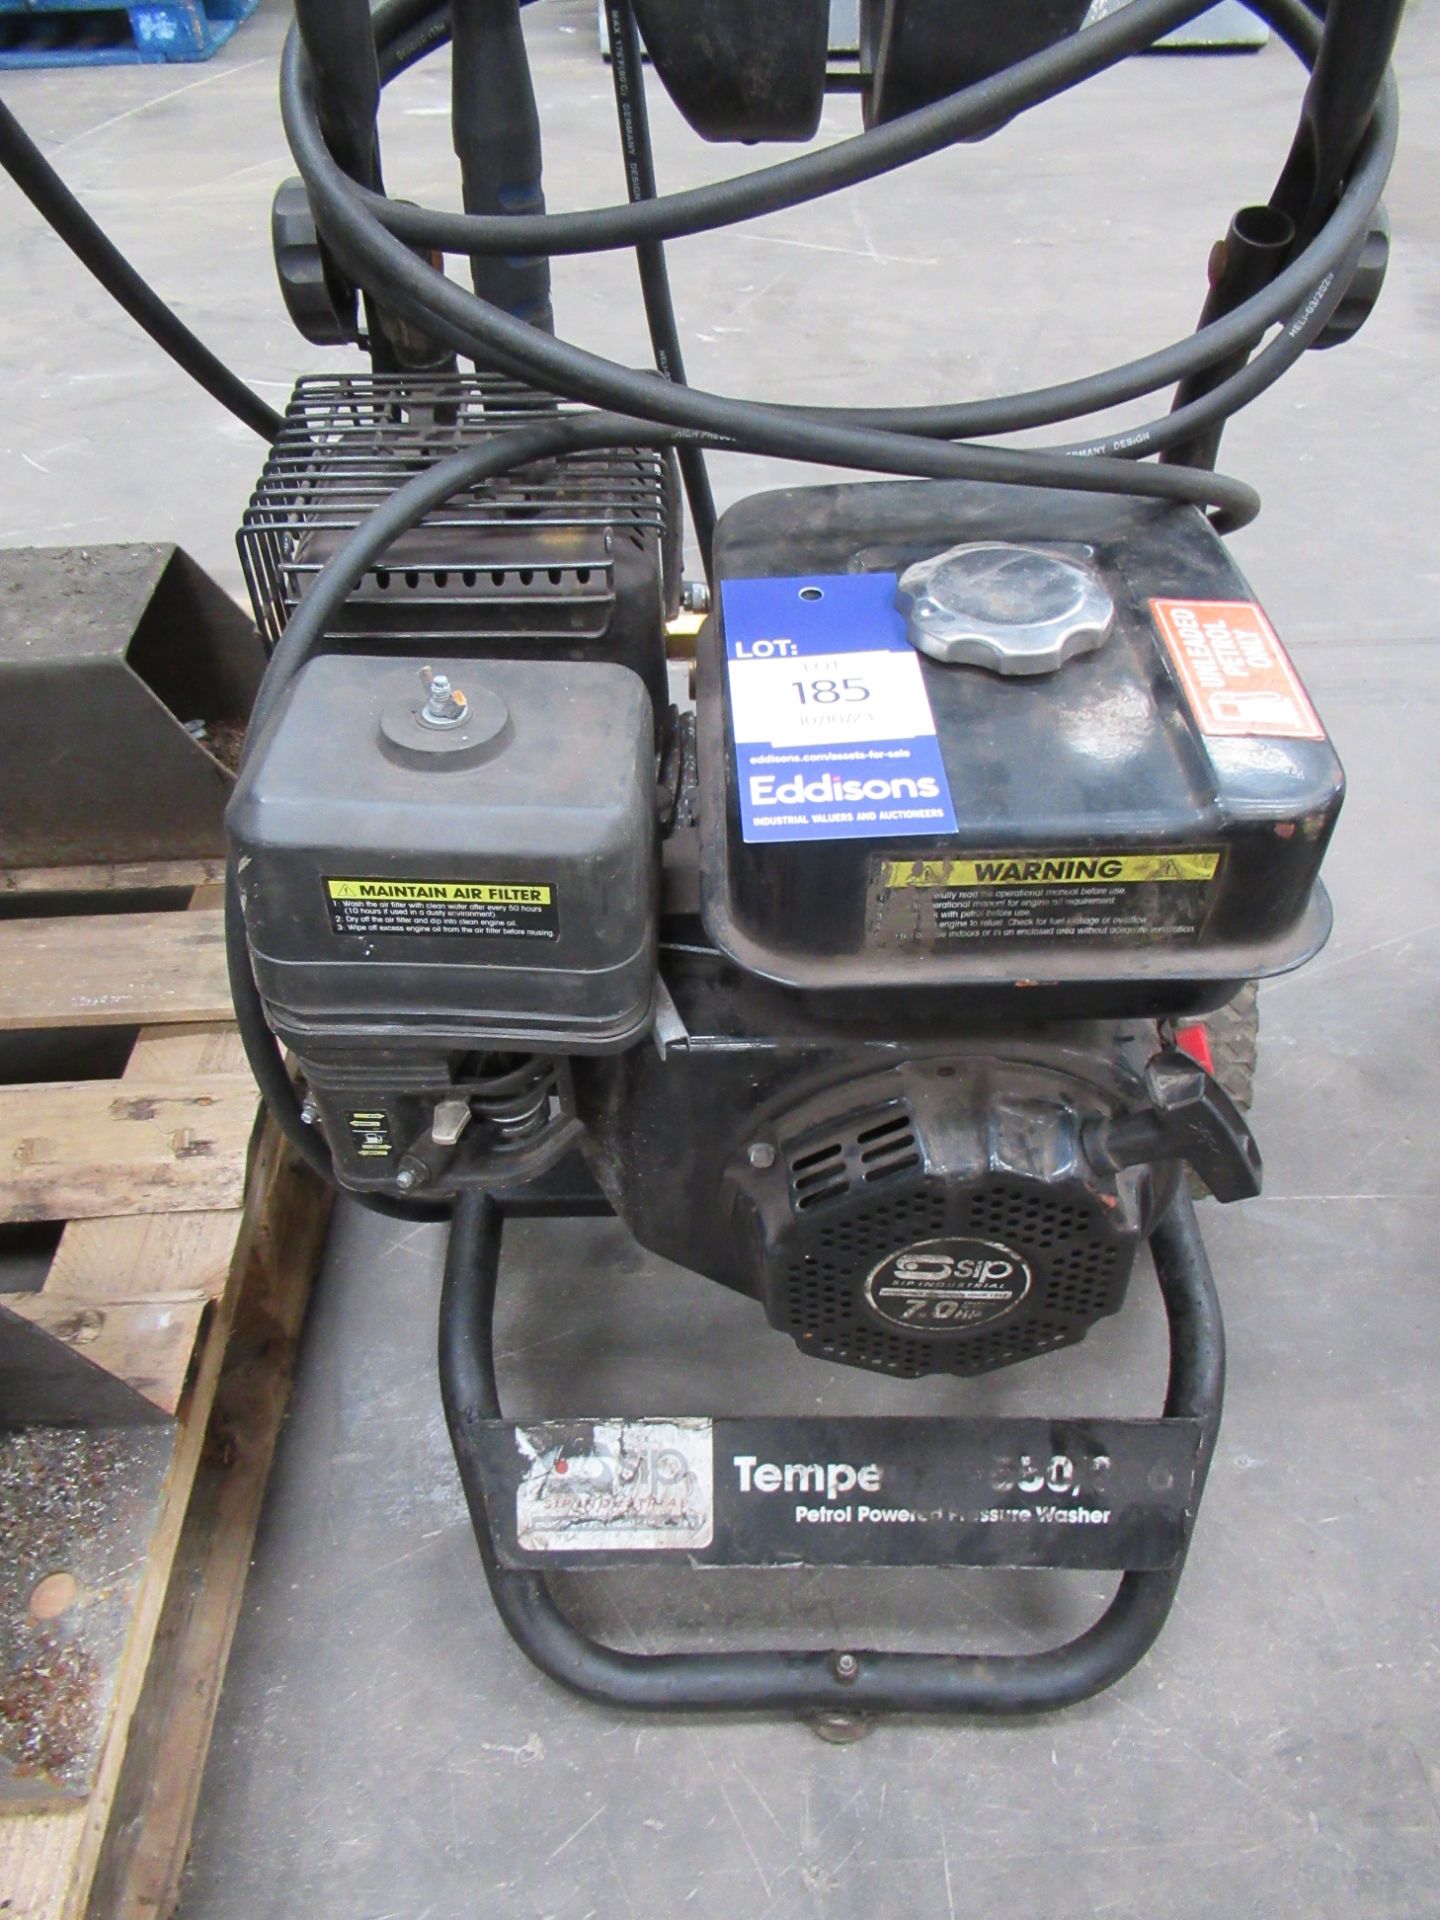 SIP Tempest TP550/206 Petrol Powered Pressure Washer - Image 2 of 3